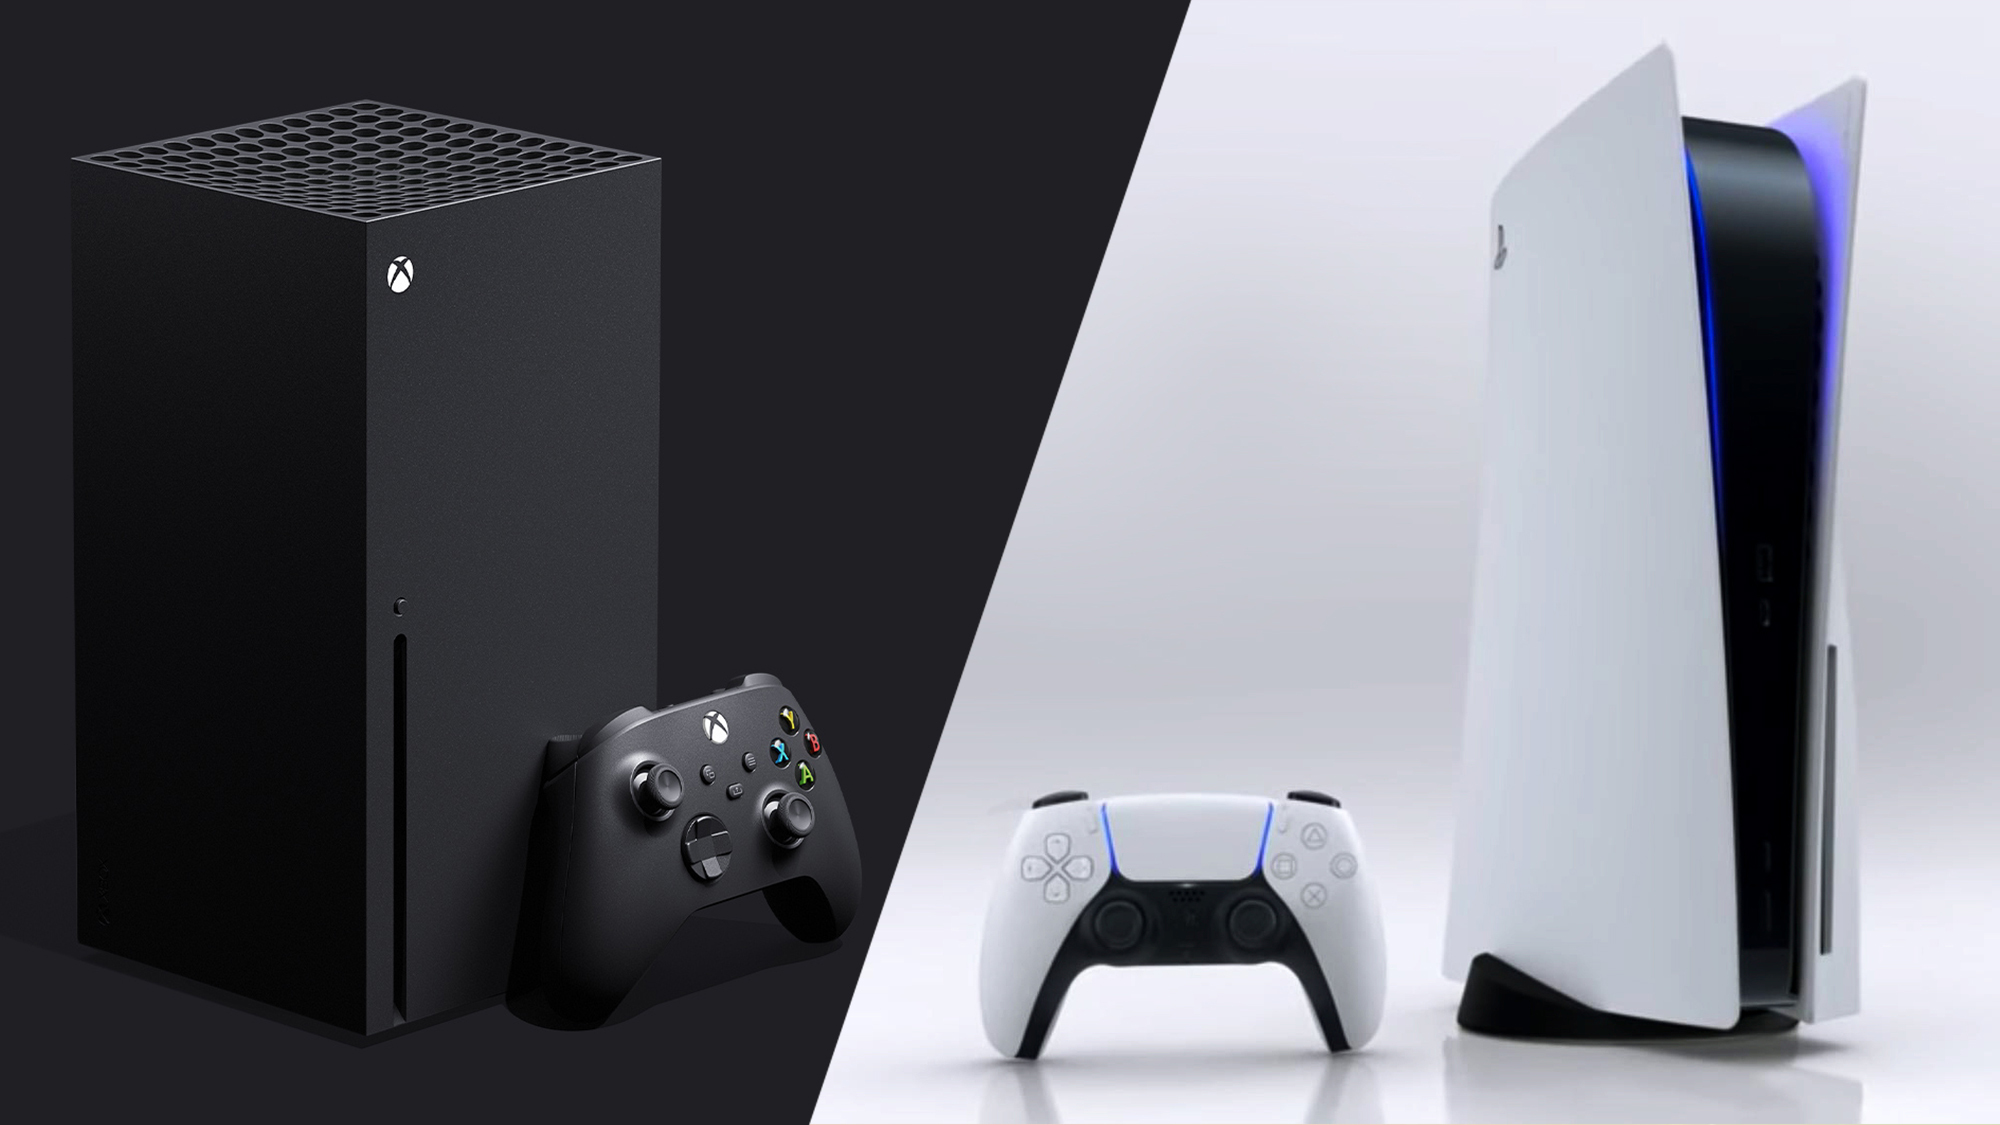 PS5 vs. Xbox Series X Specs, price, exclusives and more Tom's Guide